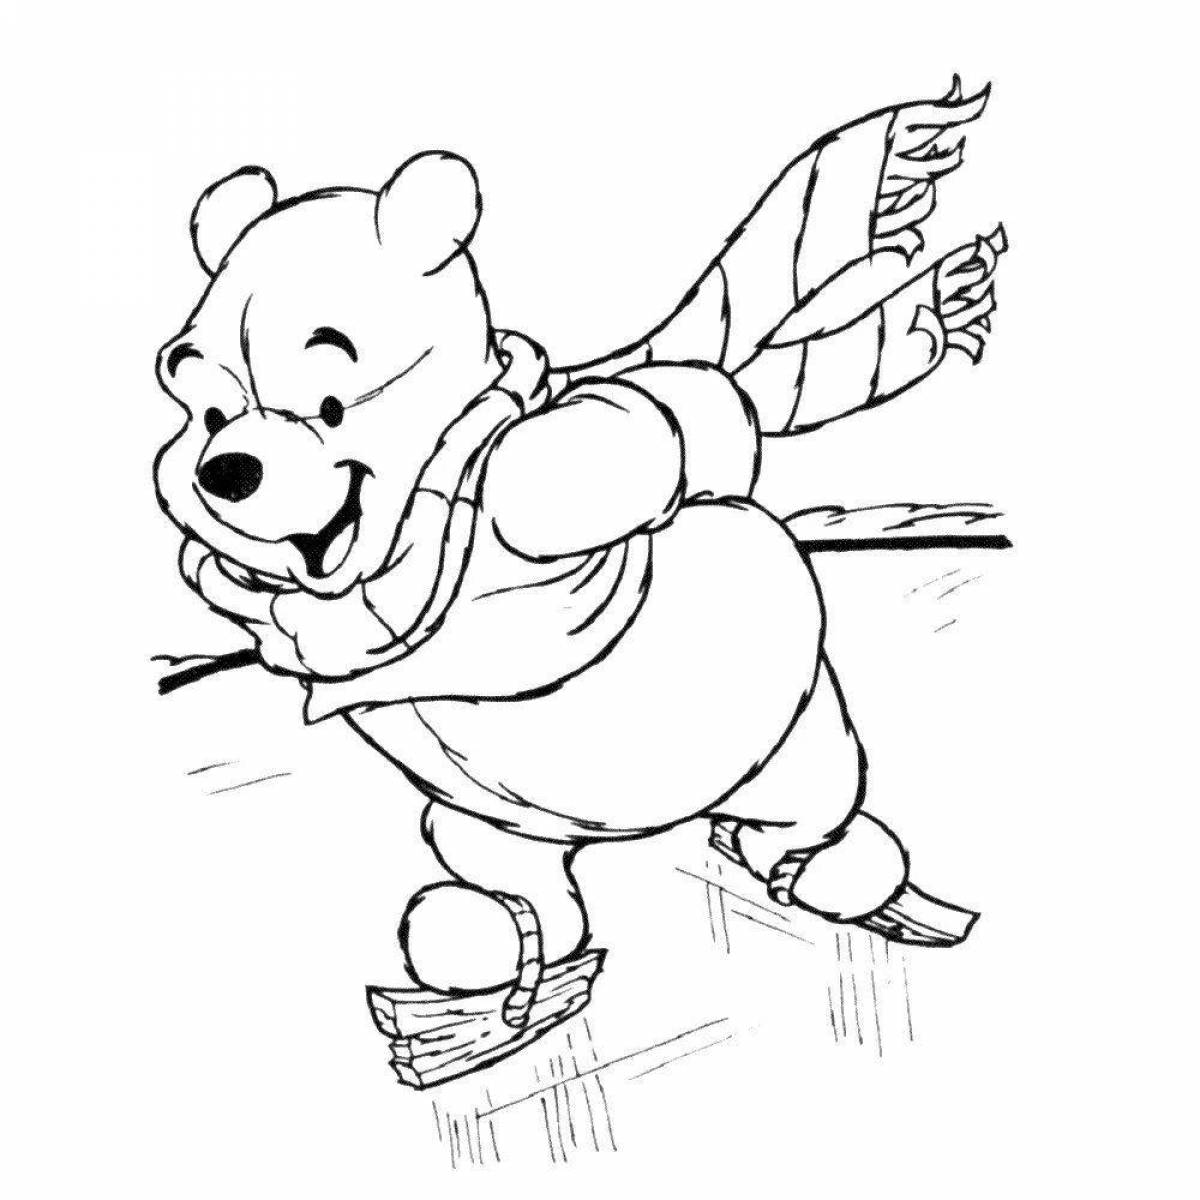 Entertaining bear on skis coloring book